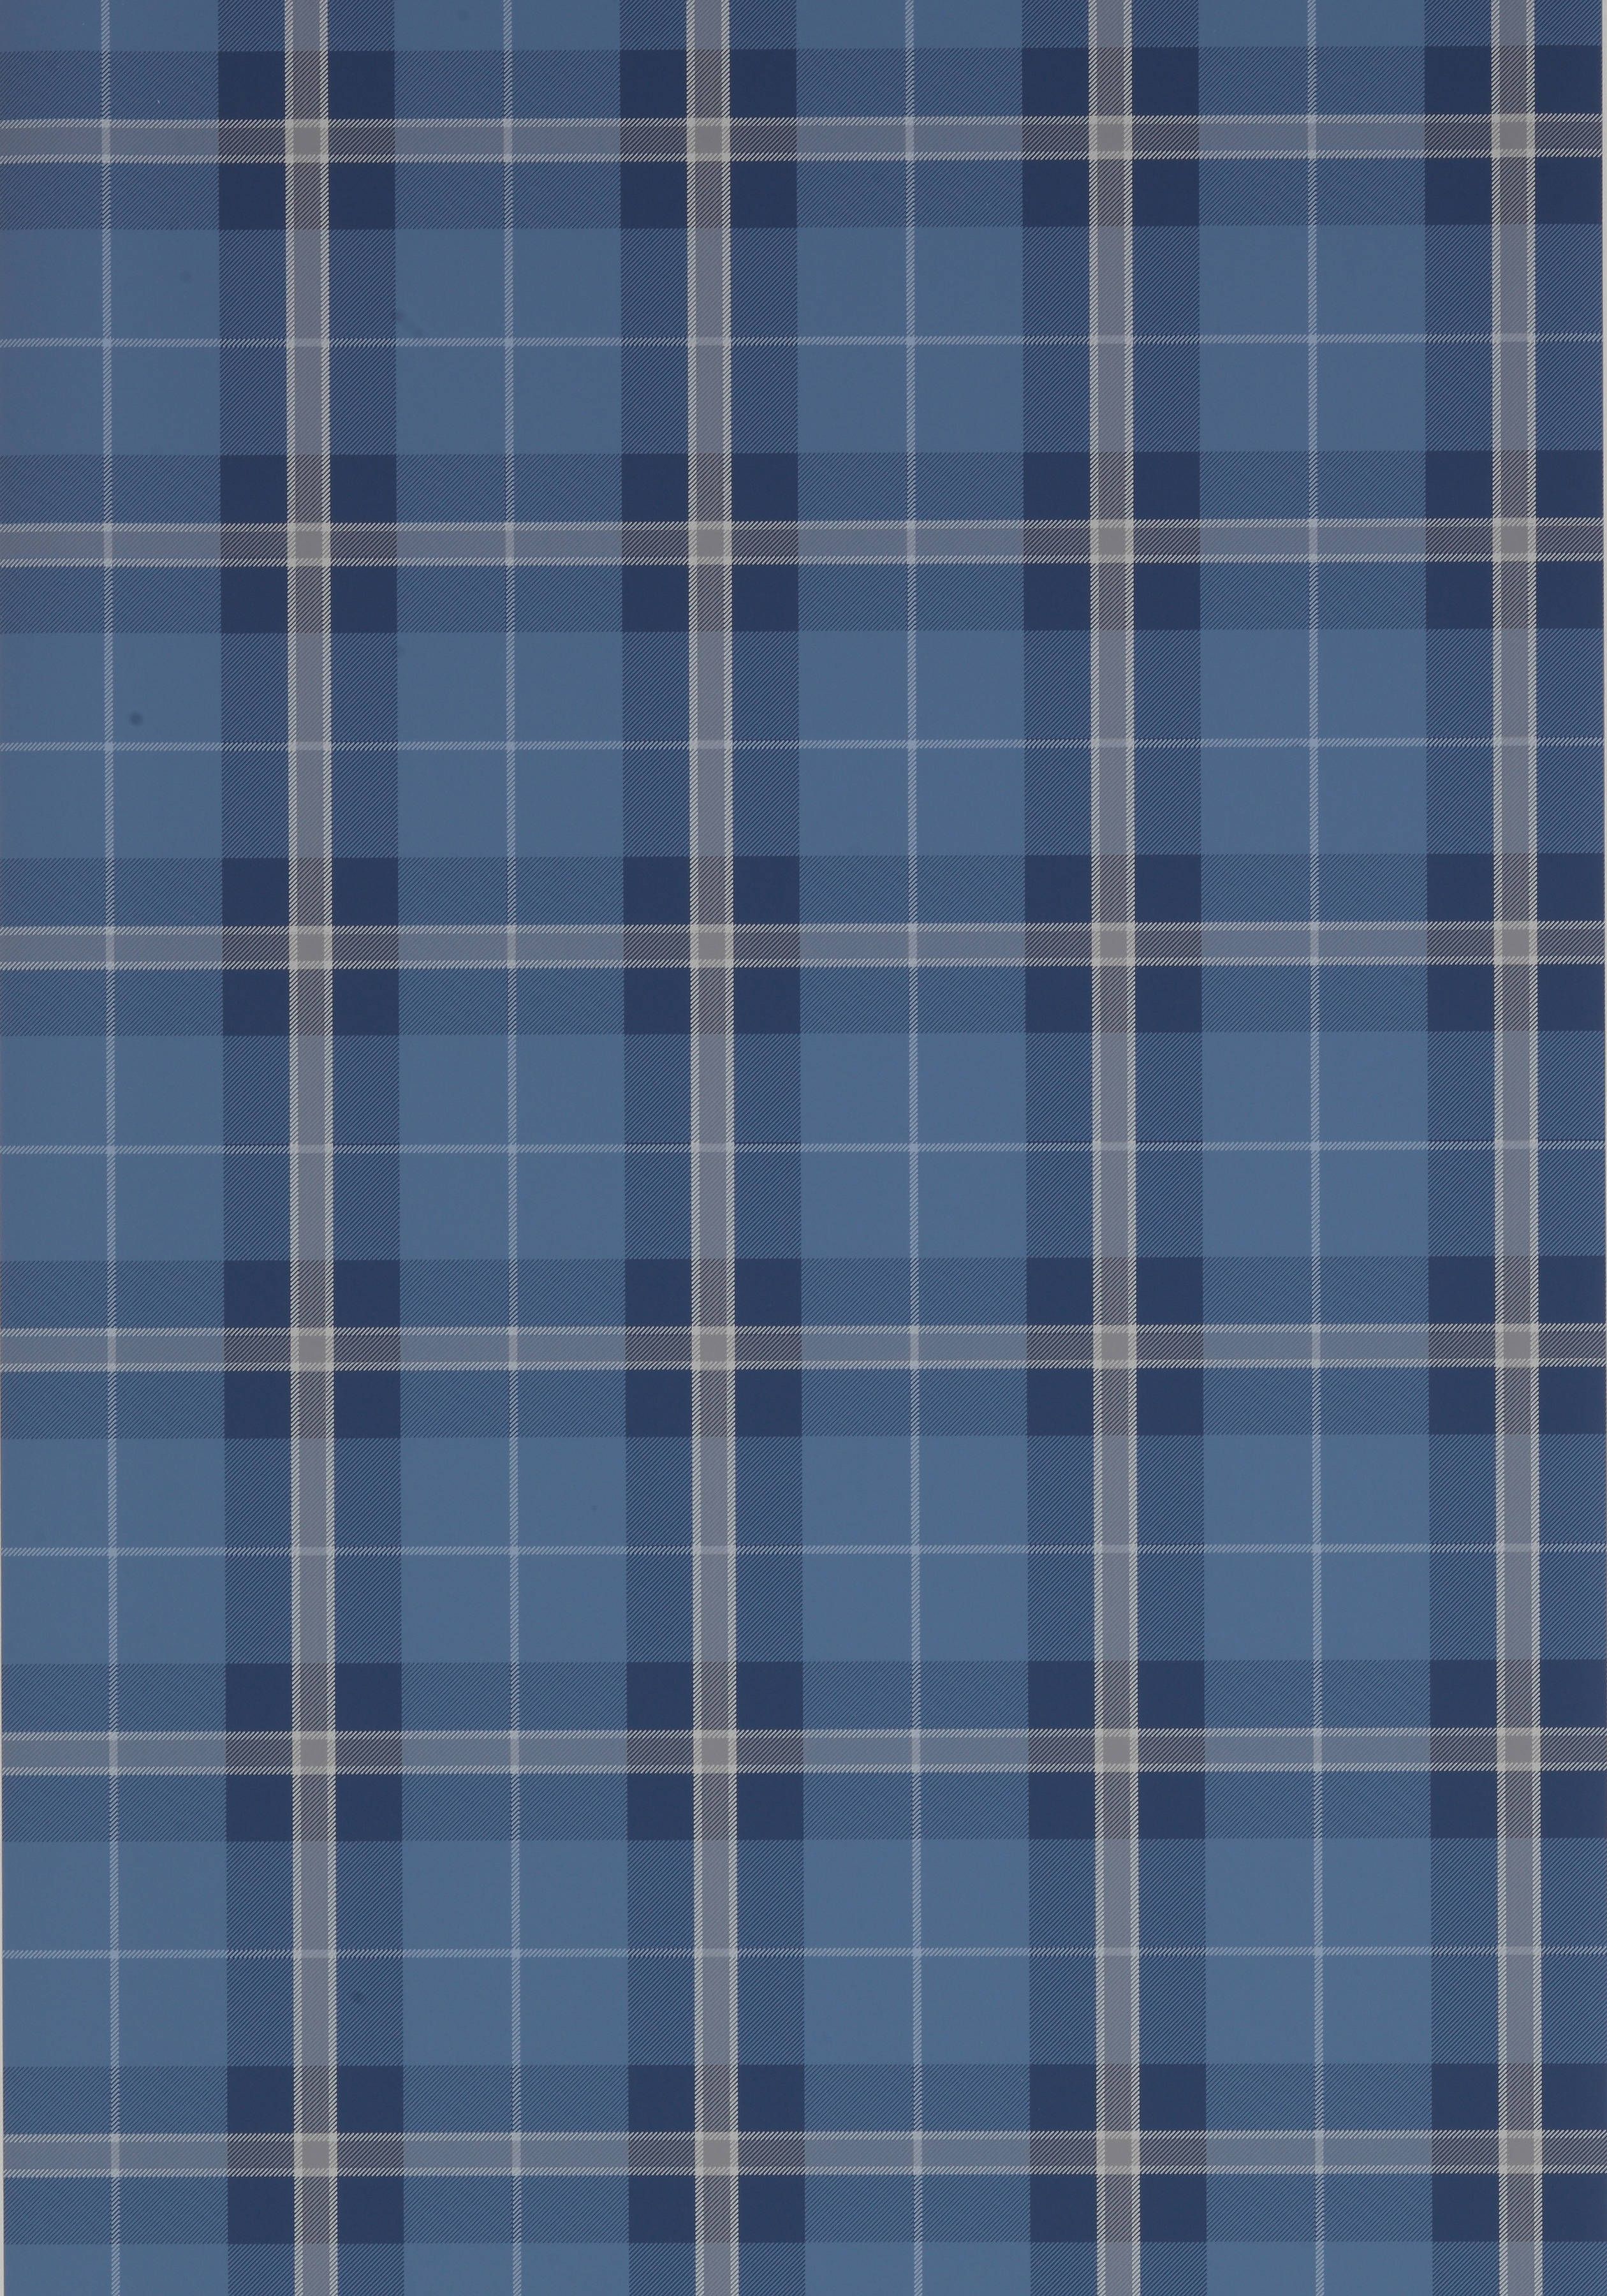 Rugged Appeal. Plaid wallpaper, Cute patterns wallpaper, Pattern wallpaper